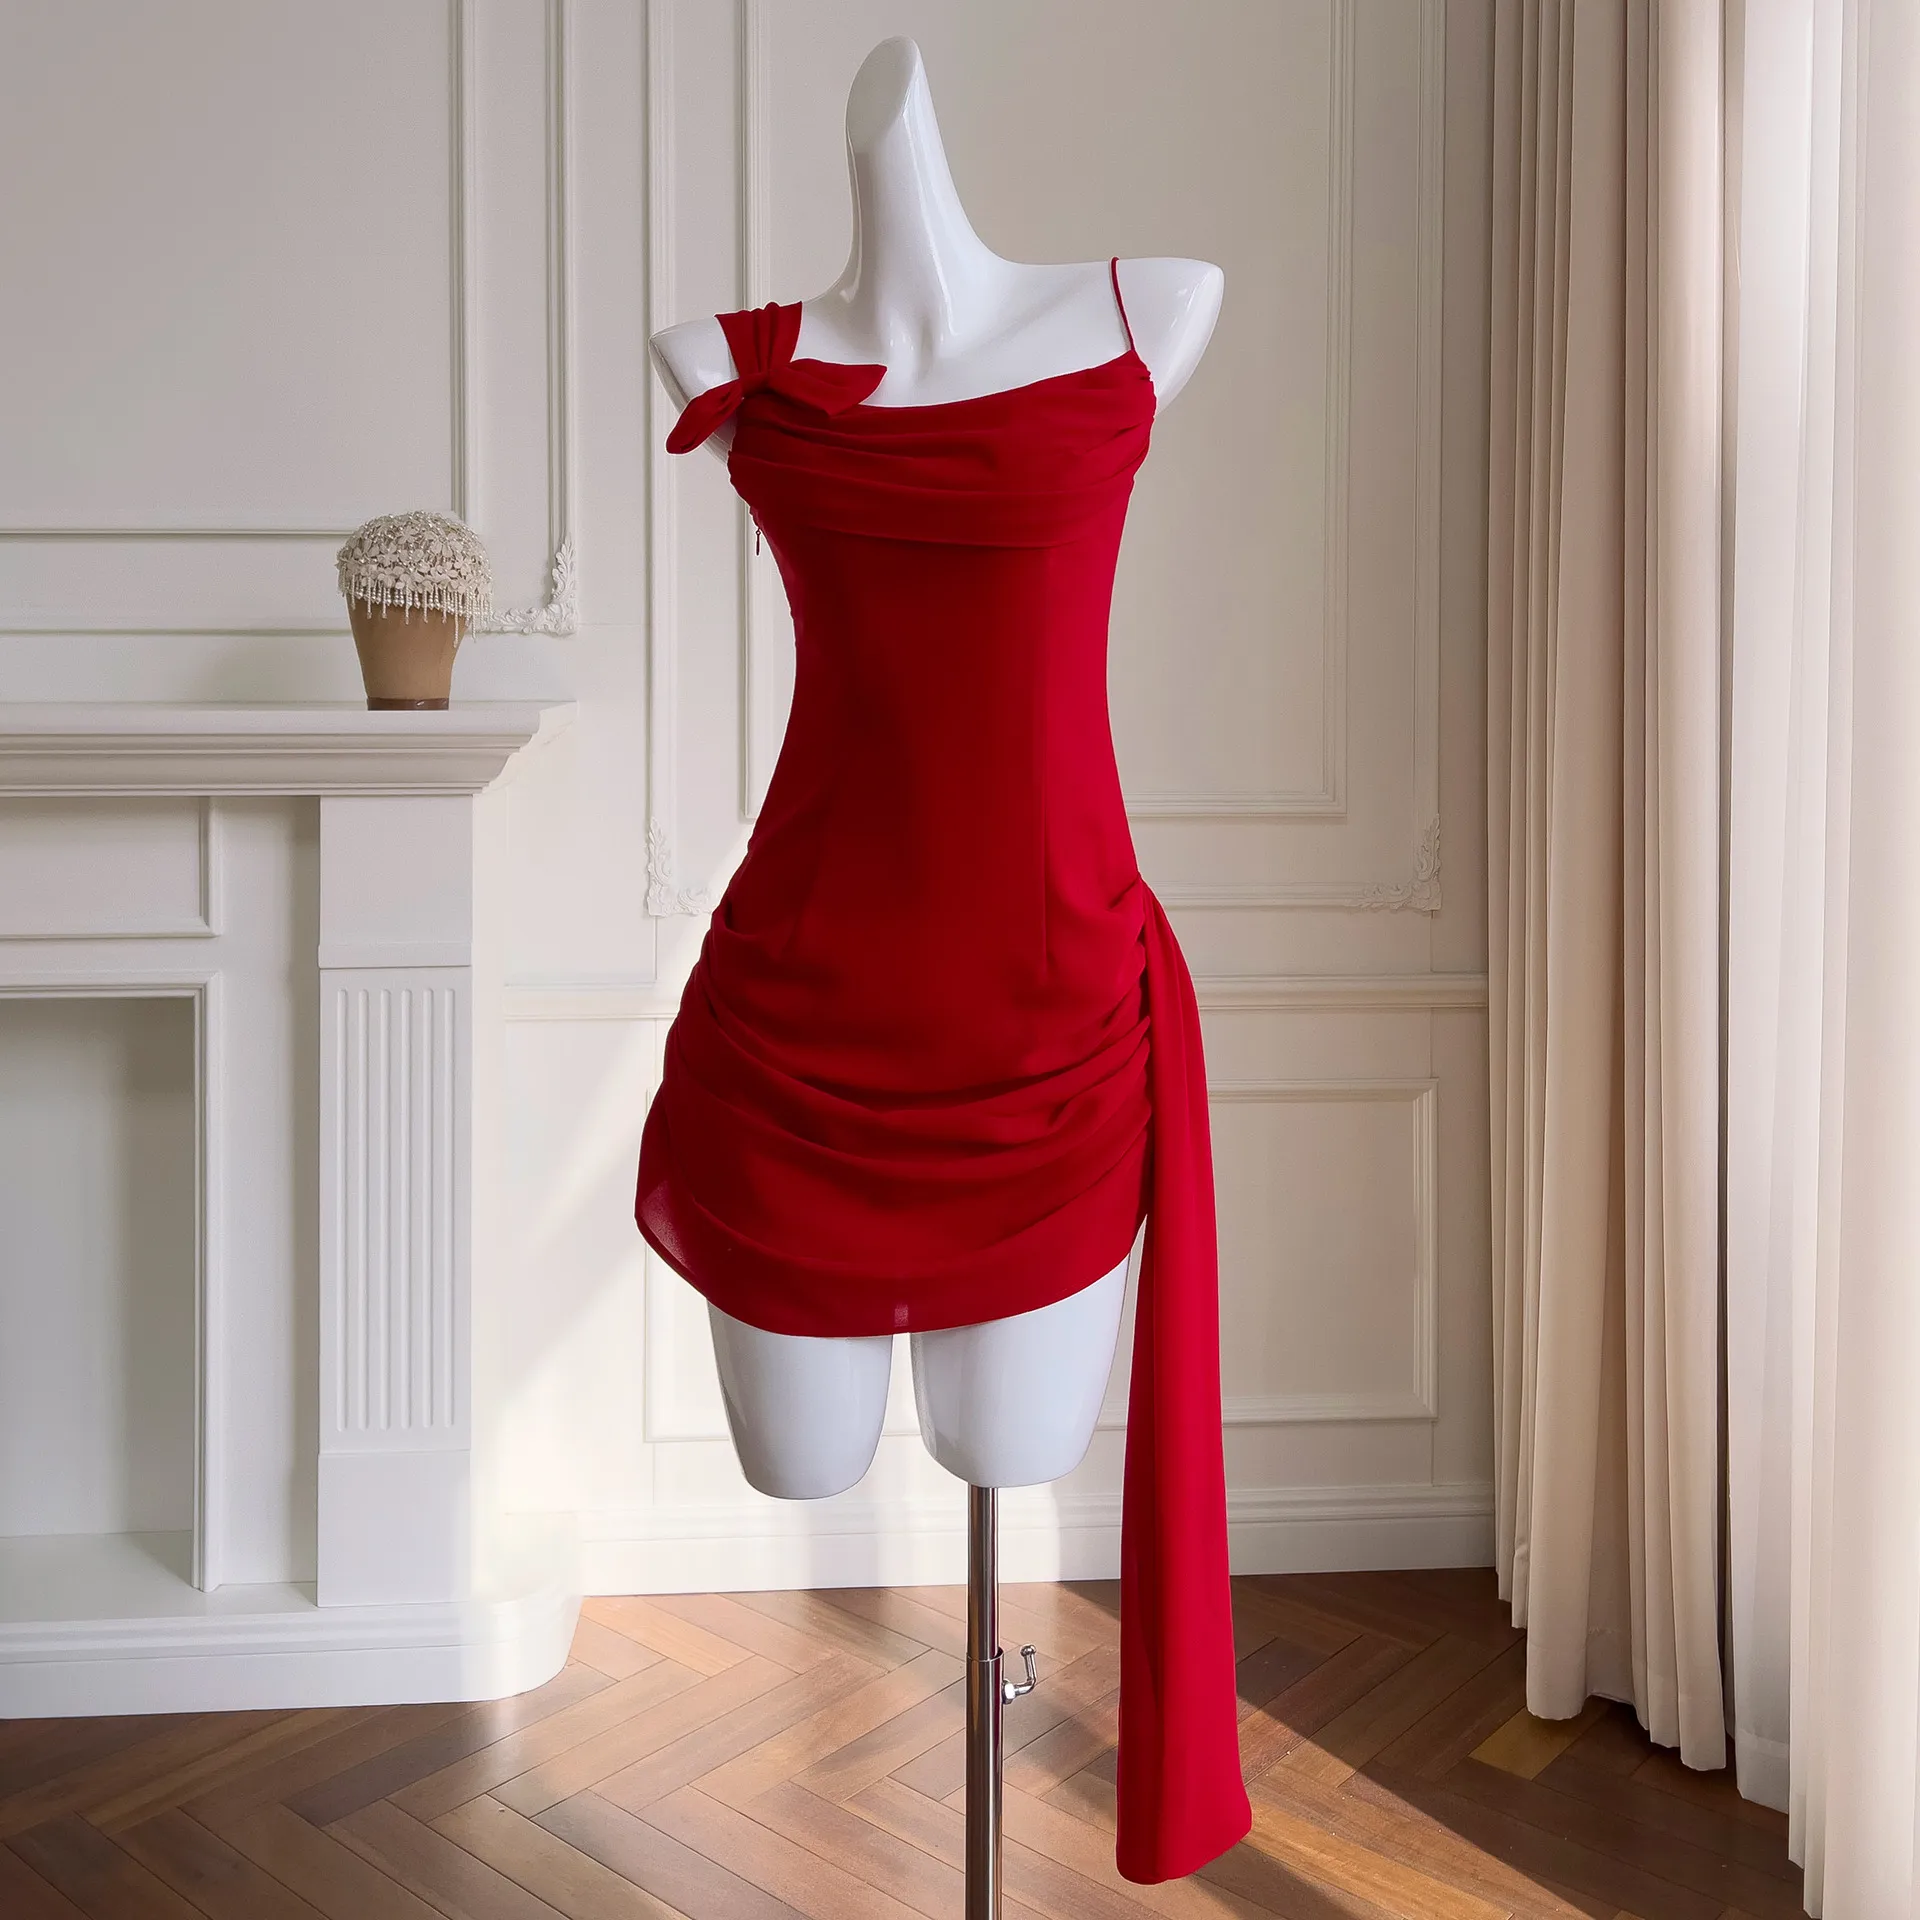 Elegant and Sexy Strap Off Shoulder Bow Decorative Dress with Waist Closure for Slimming and Hip Wrapping Red Dress 68415